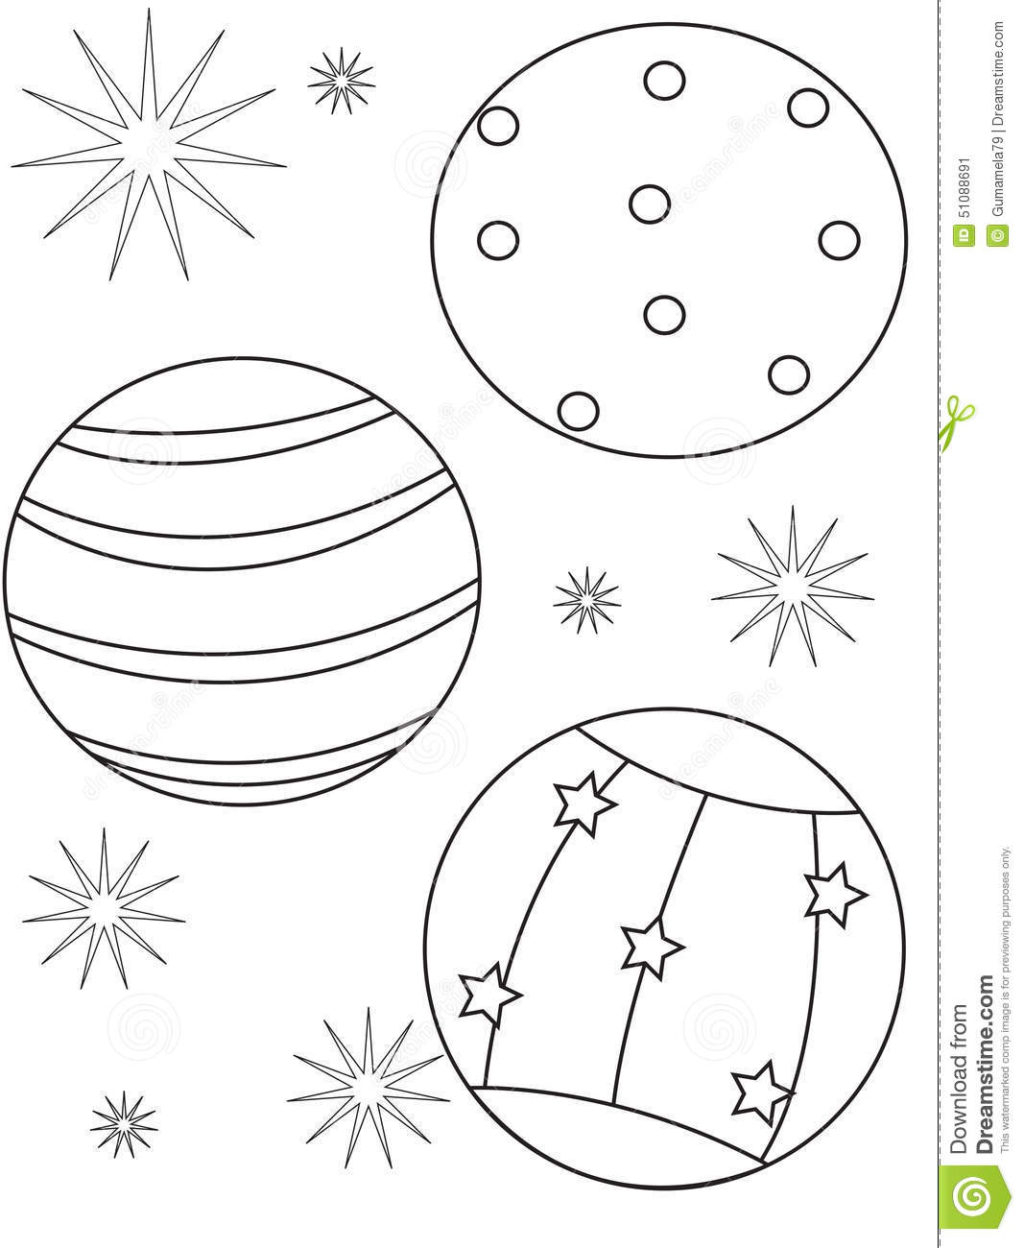 Plate Coloring Page Coloring Book World Beach Ballg Page Useful As Book Kids Public